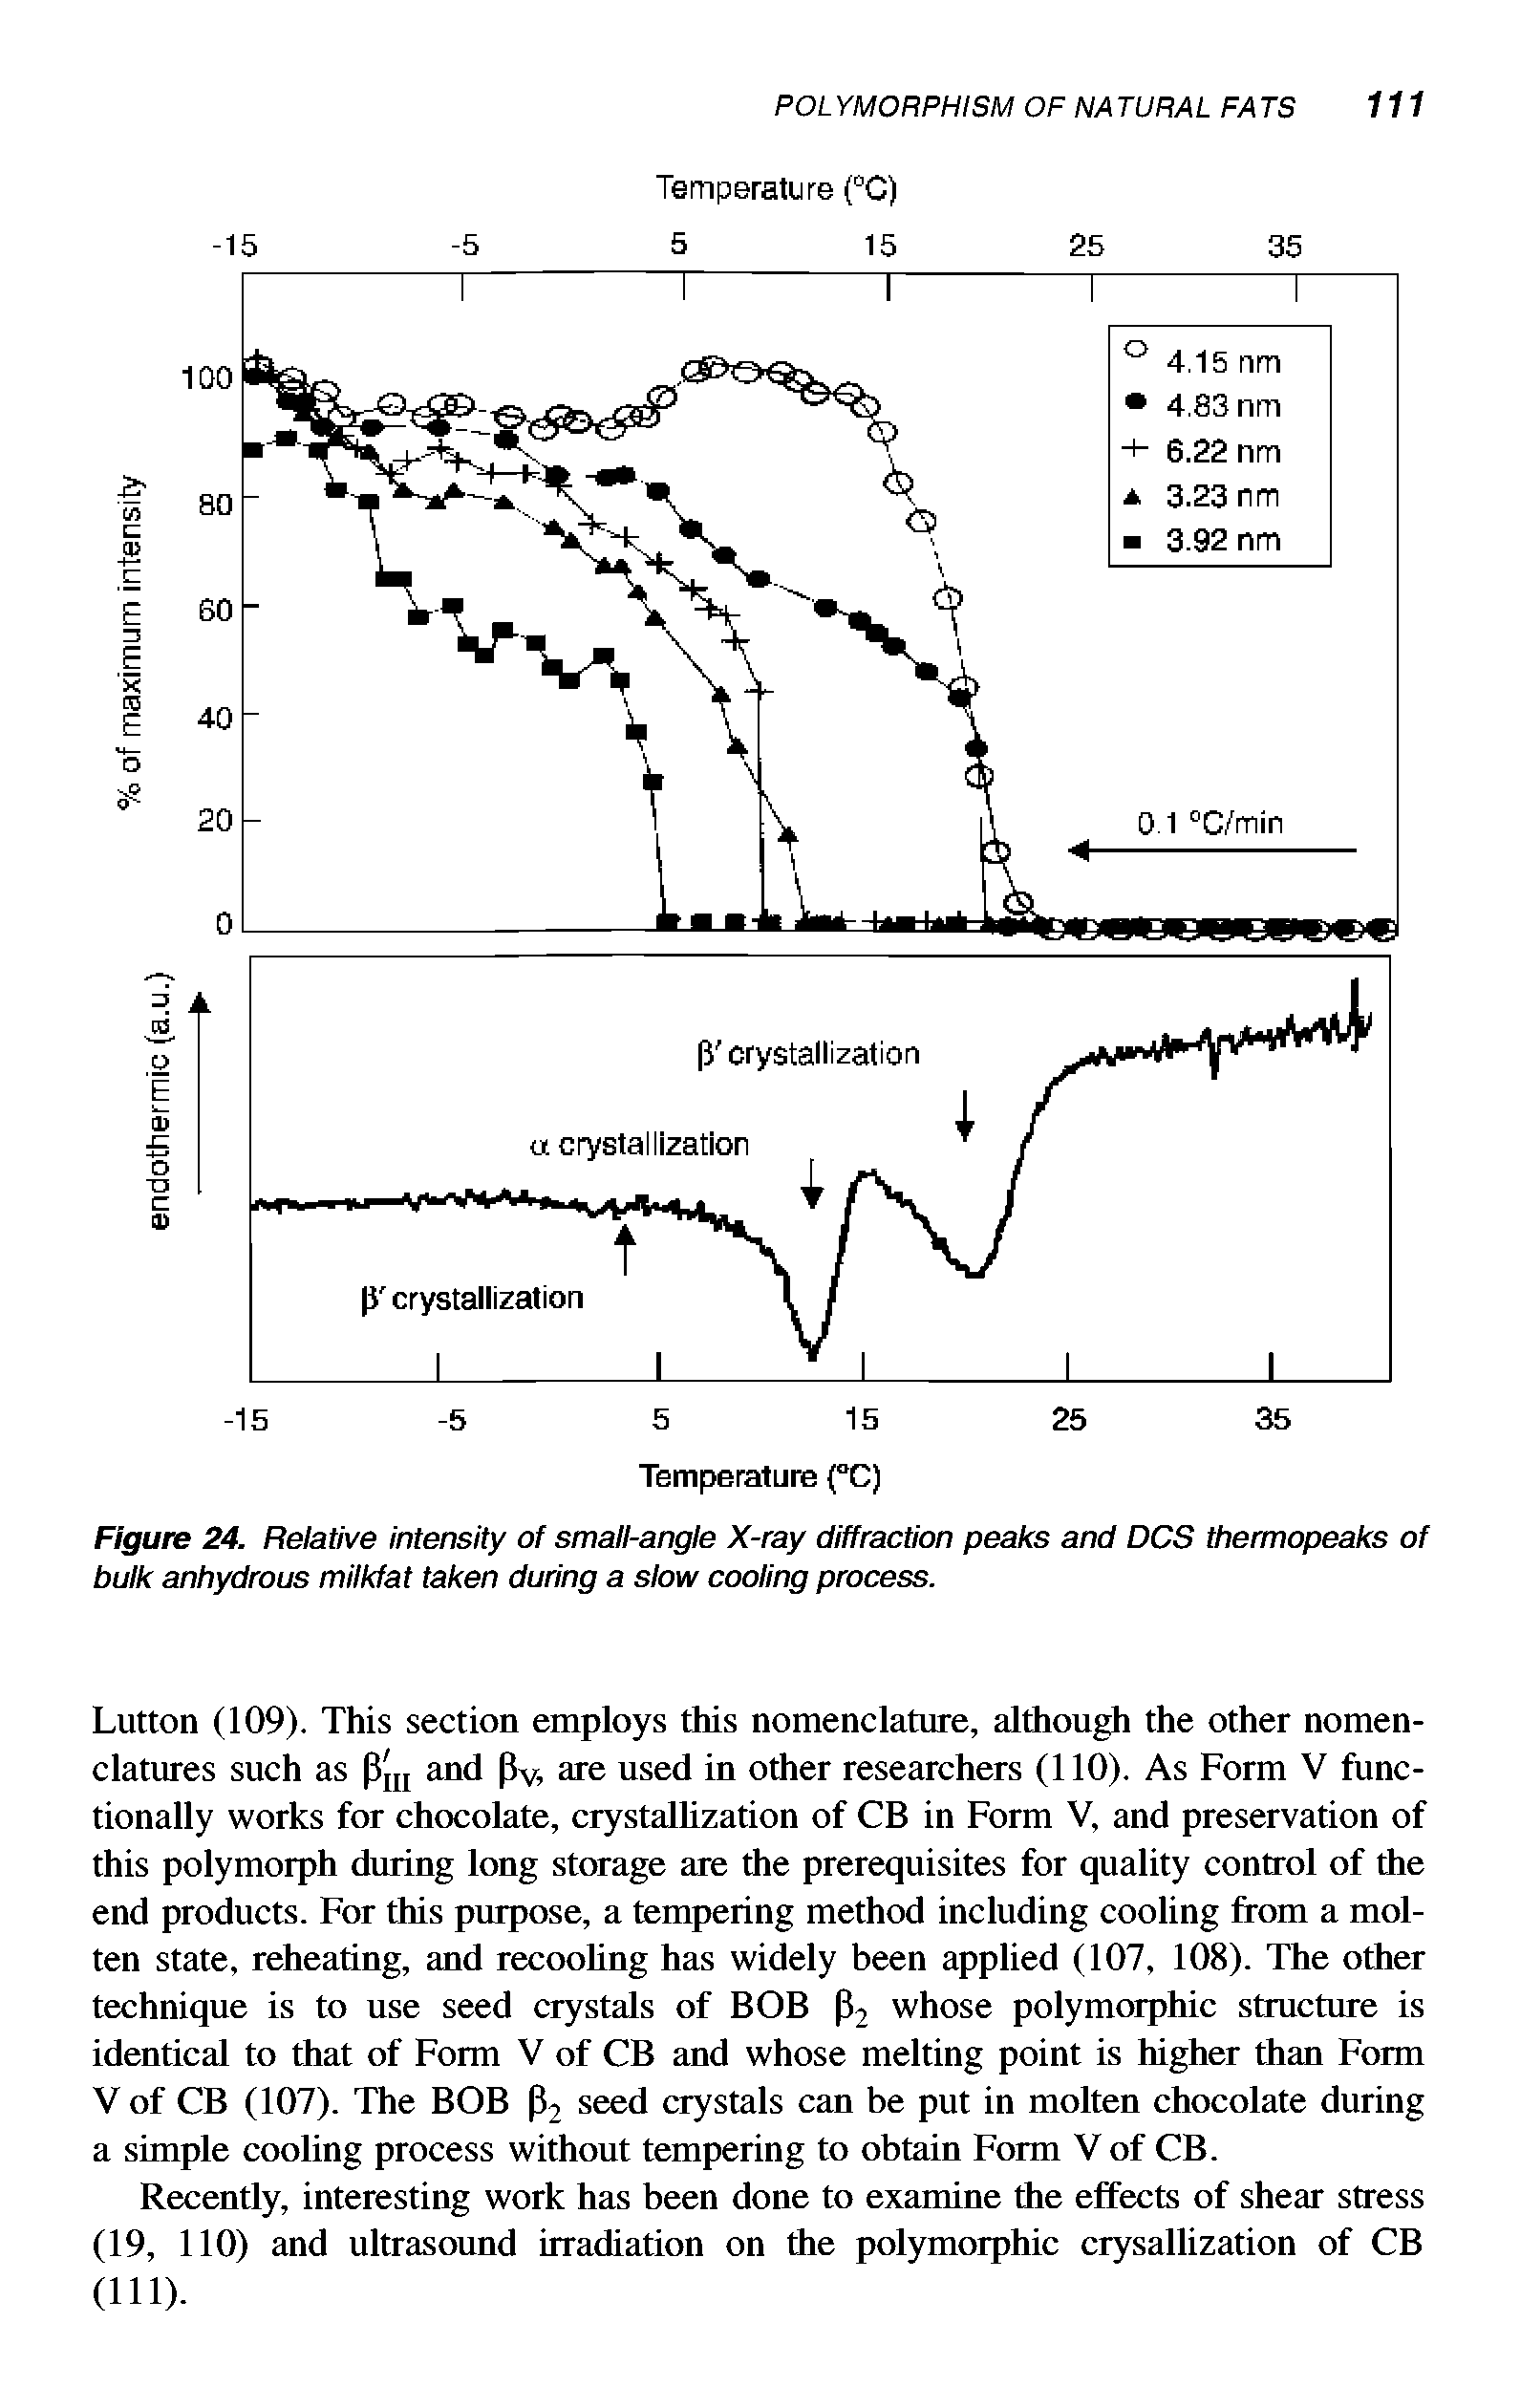 Figure 24. Relative intensity of small-angle X-ray diffraction peaks and DCS thermopeaks of bulk anhydrous milkfat taken during a slow cooling process.